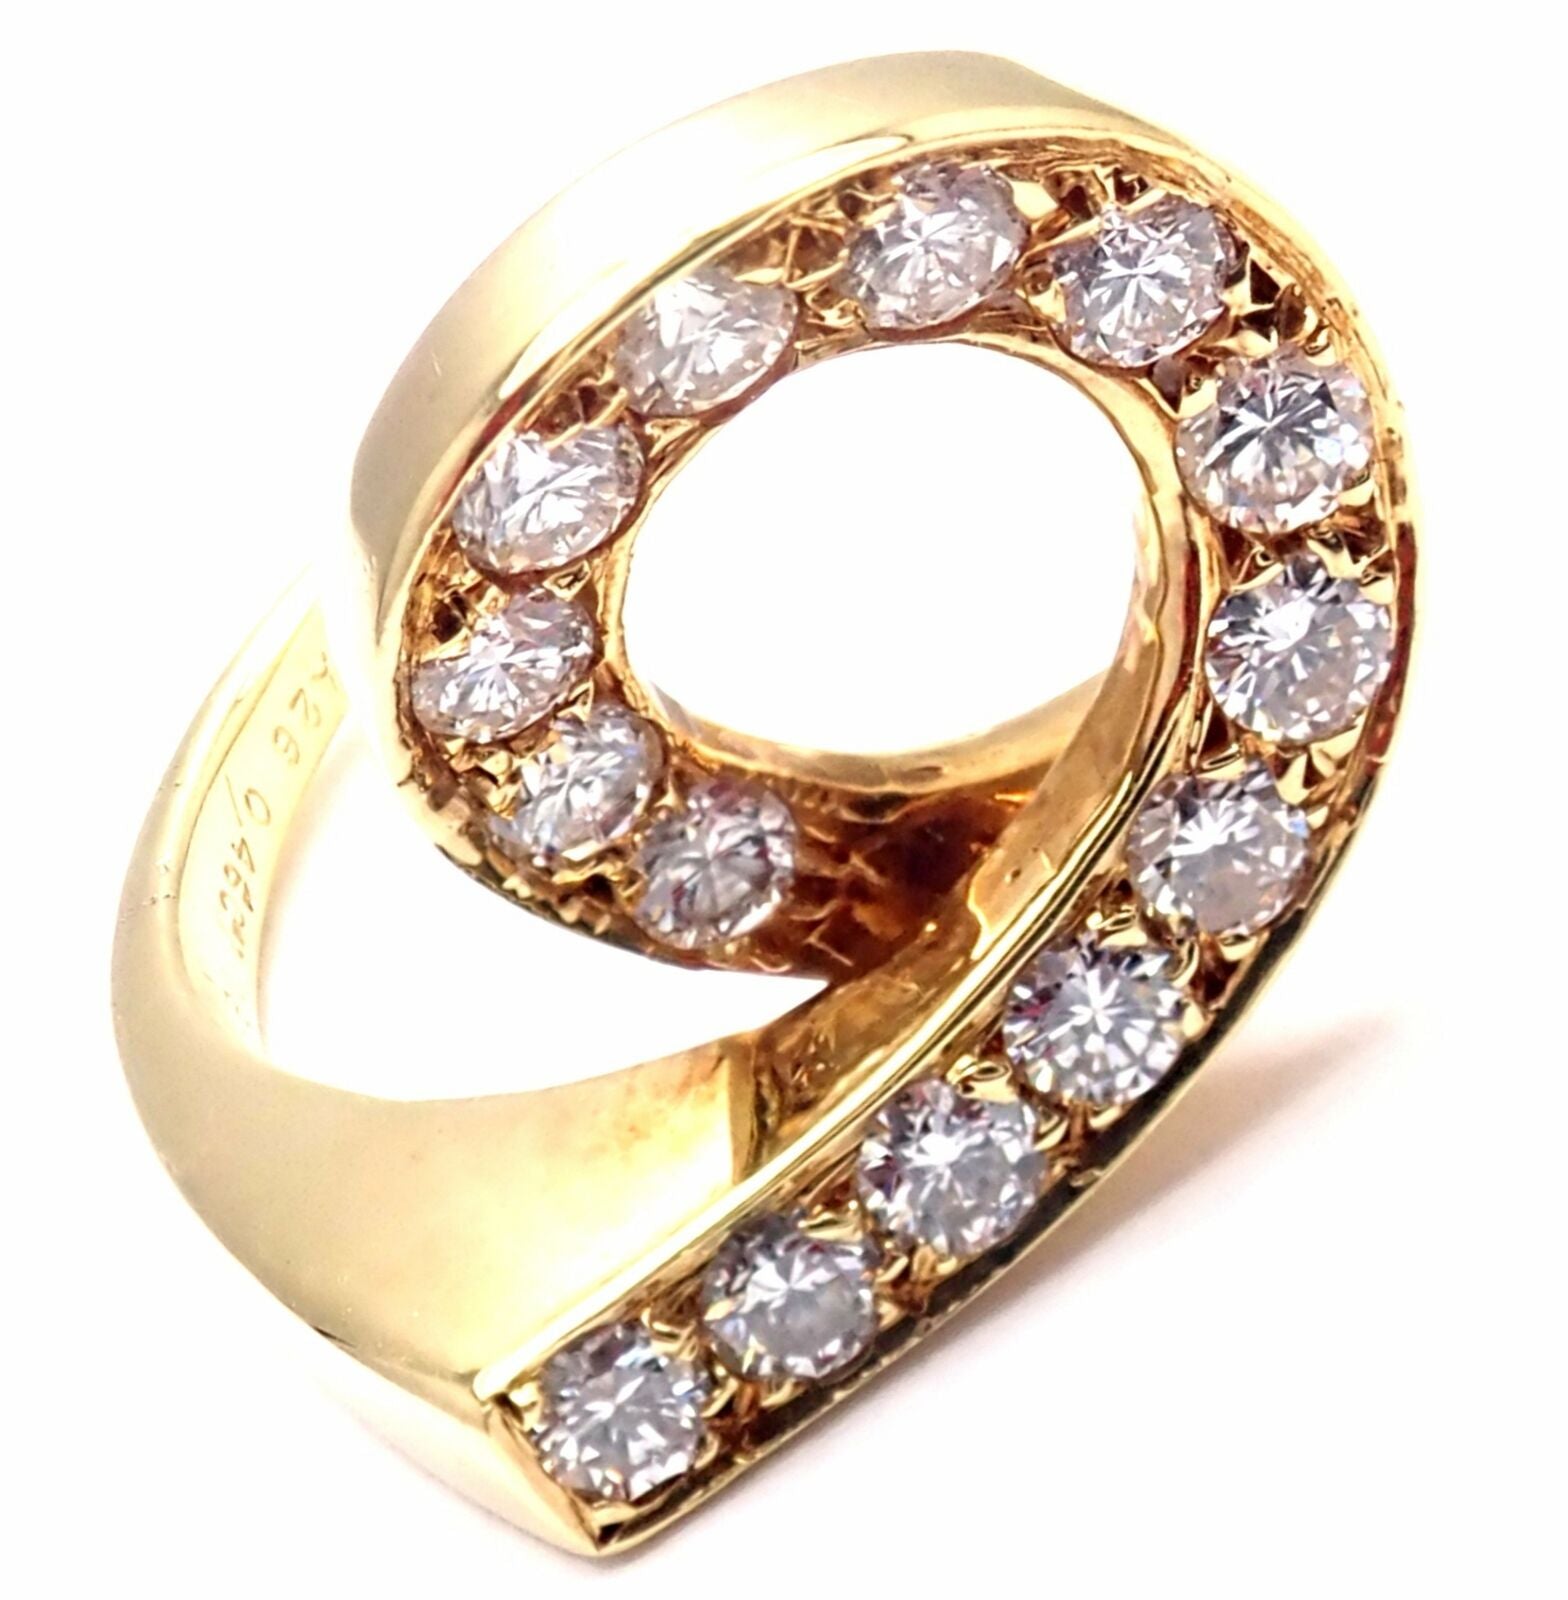 Van Cleef & Arpels Jewelry & Watches:Fine Jewelry:Rings Rare! Authentic Van Cleef & Arpels 18k Yellow Gold Diamond Swirl Band Ring